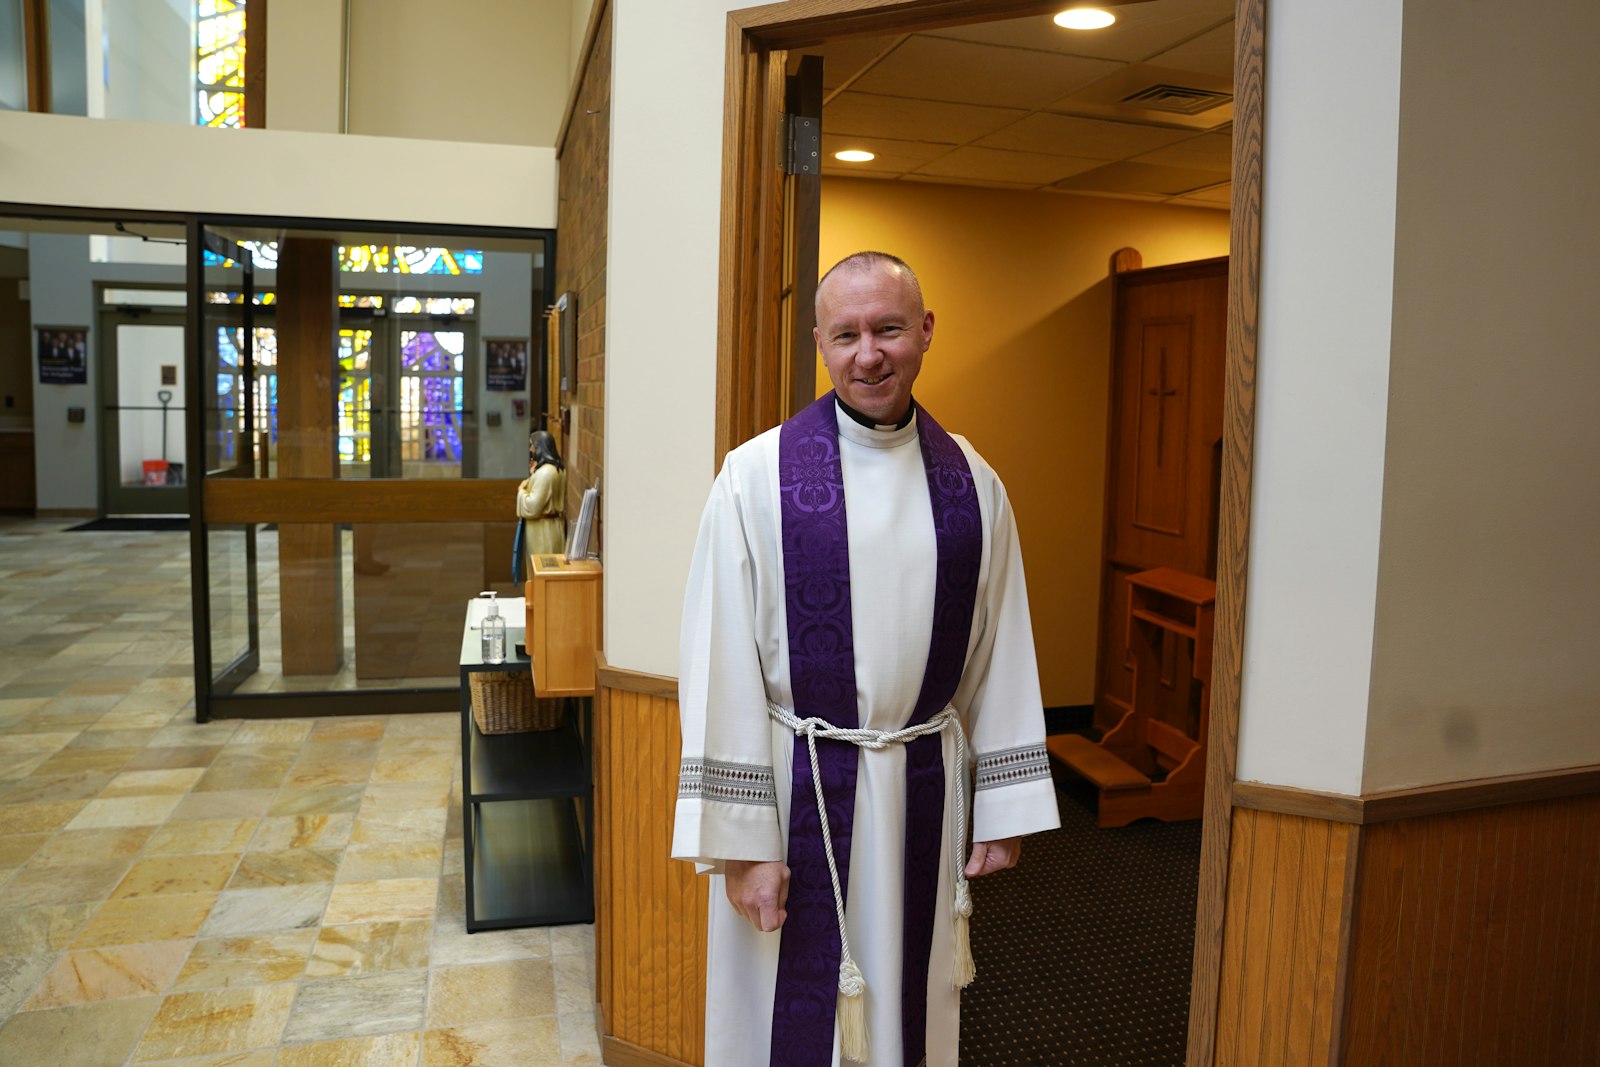 Fr. Dawson said he encourages people to come to confession even if they haven't been in quite some time, or ever, adding he's not there to judge someone's sins, but to help them encounter God's abundant mercy.